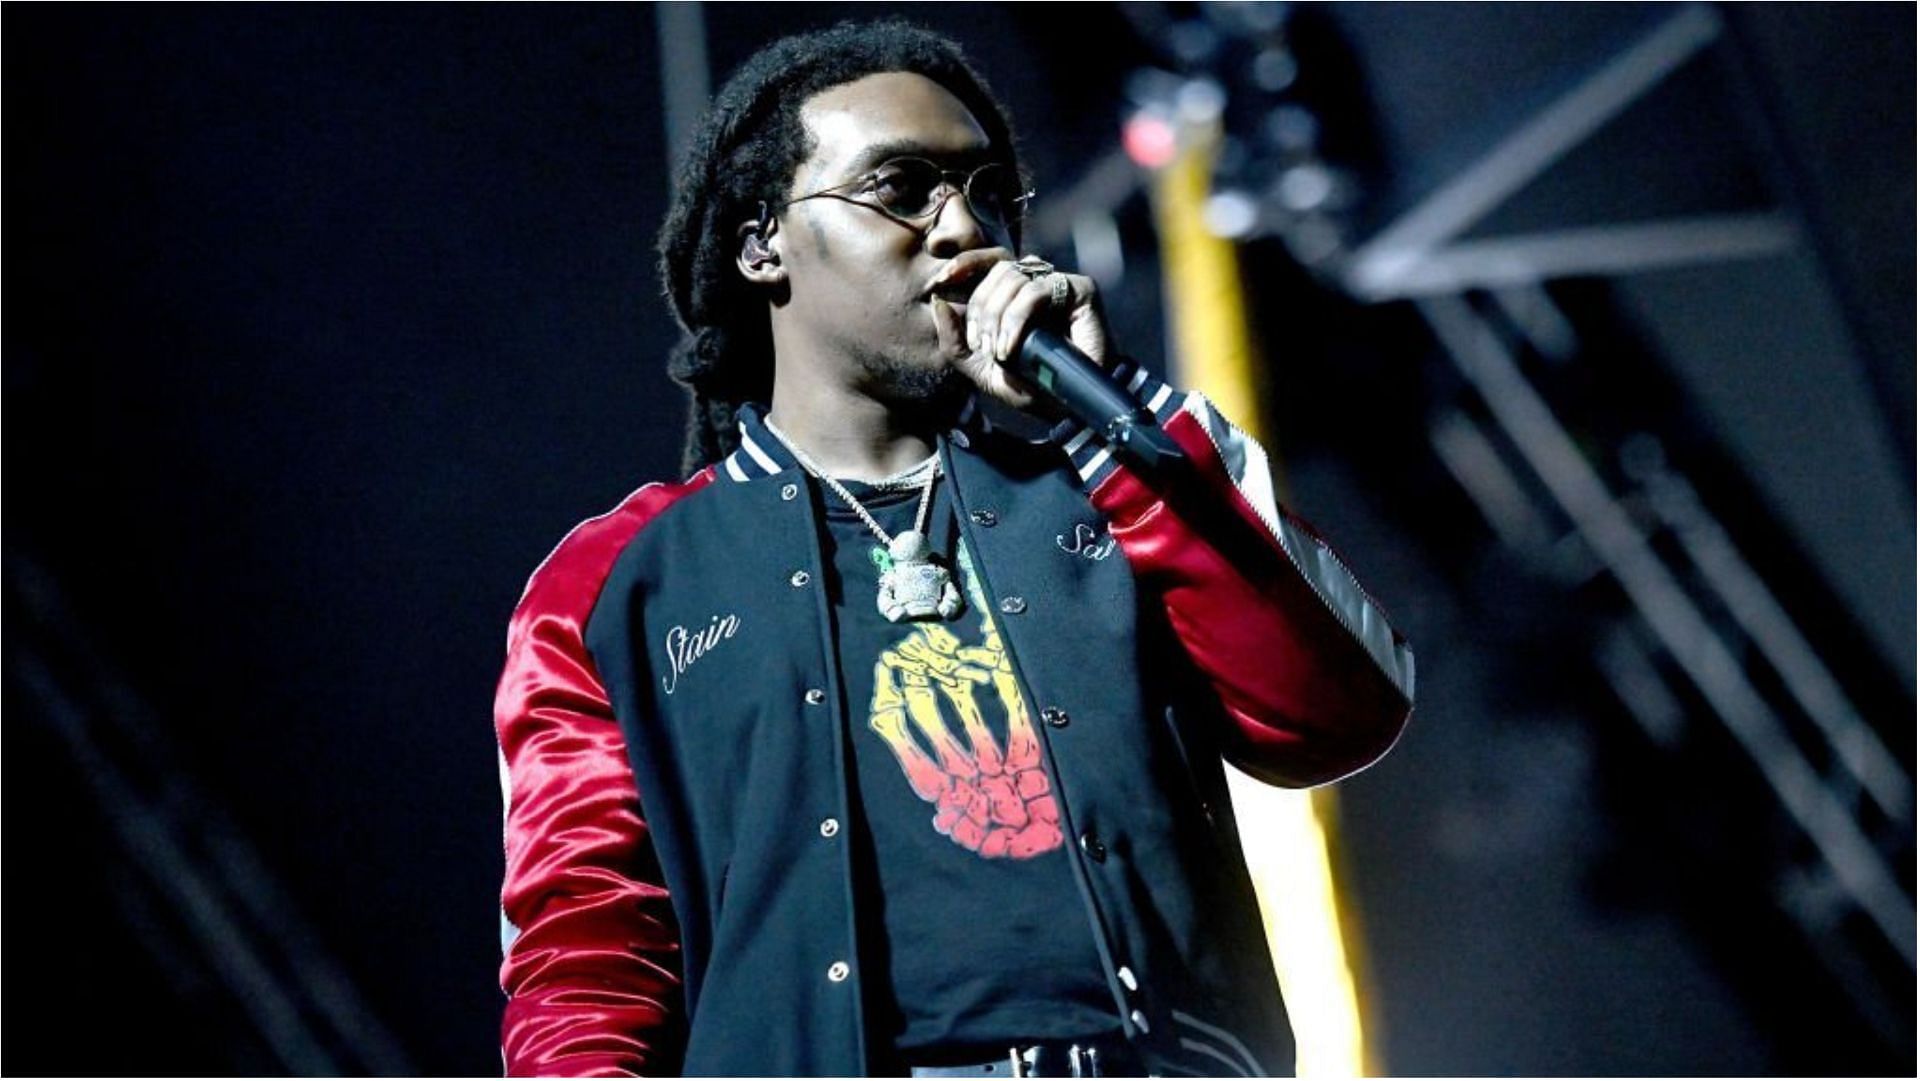 Takeoff&#039;s name was linked to a few personalities, but the reports were not confirmed (Image via Scott Dudelson/Getty Images)